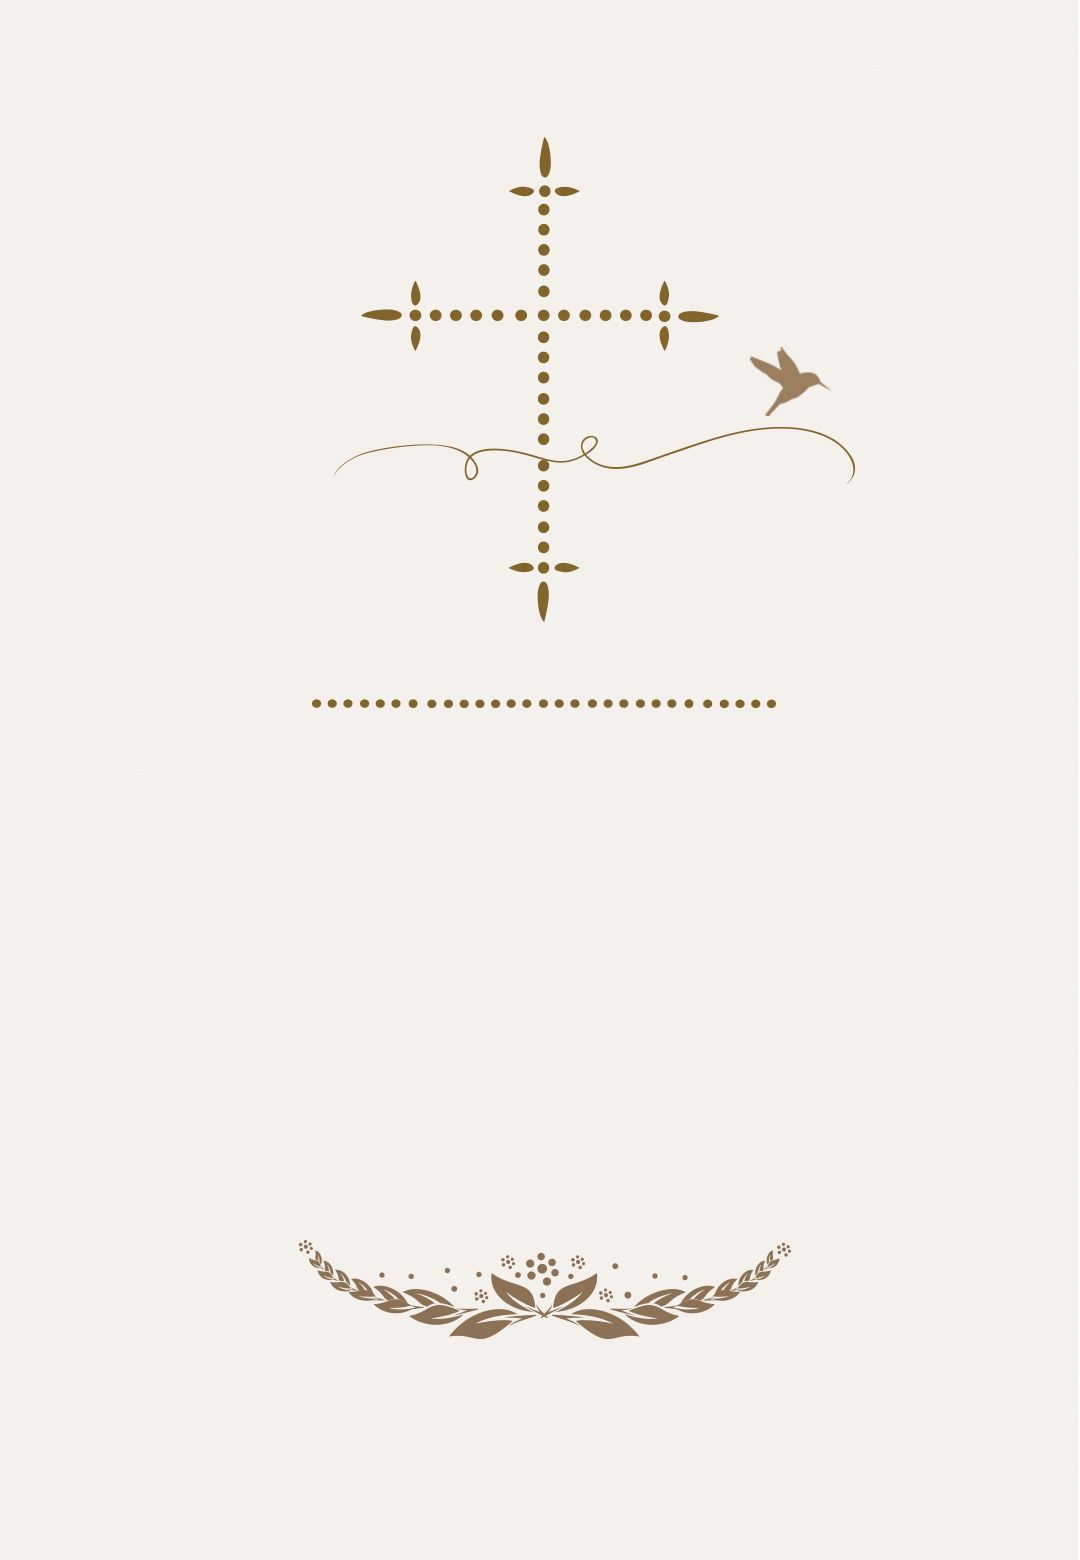 Stylized Cross Free Communion Invitation Template Greetings in dimensions 1080 X 1560